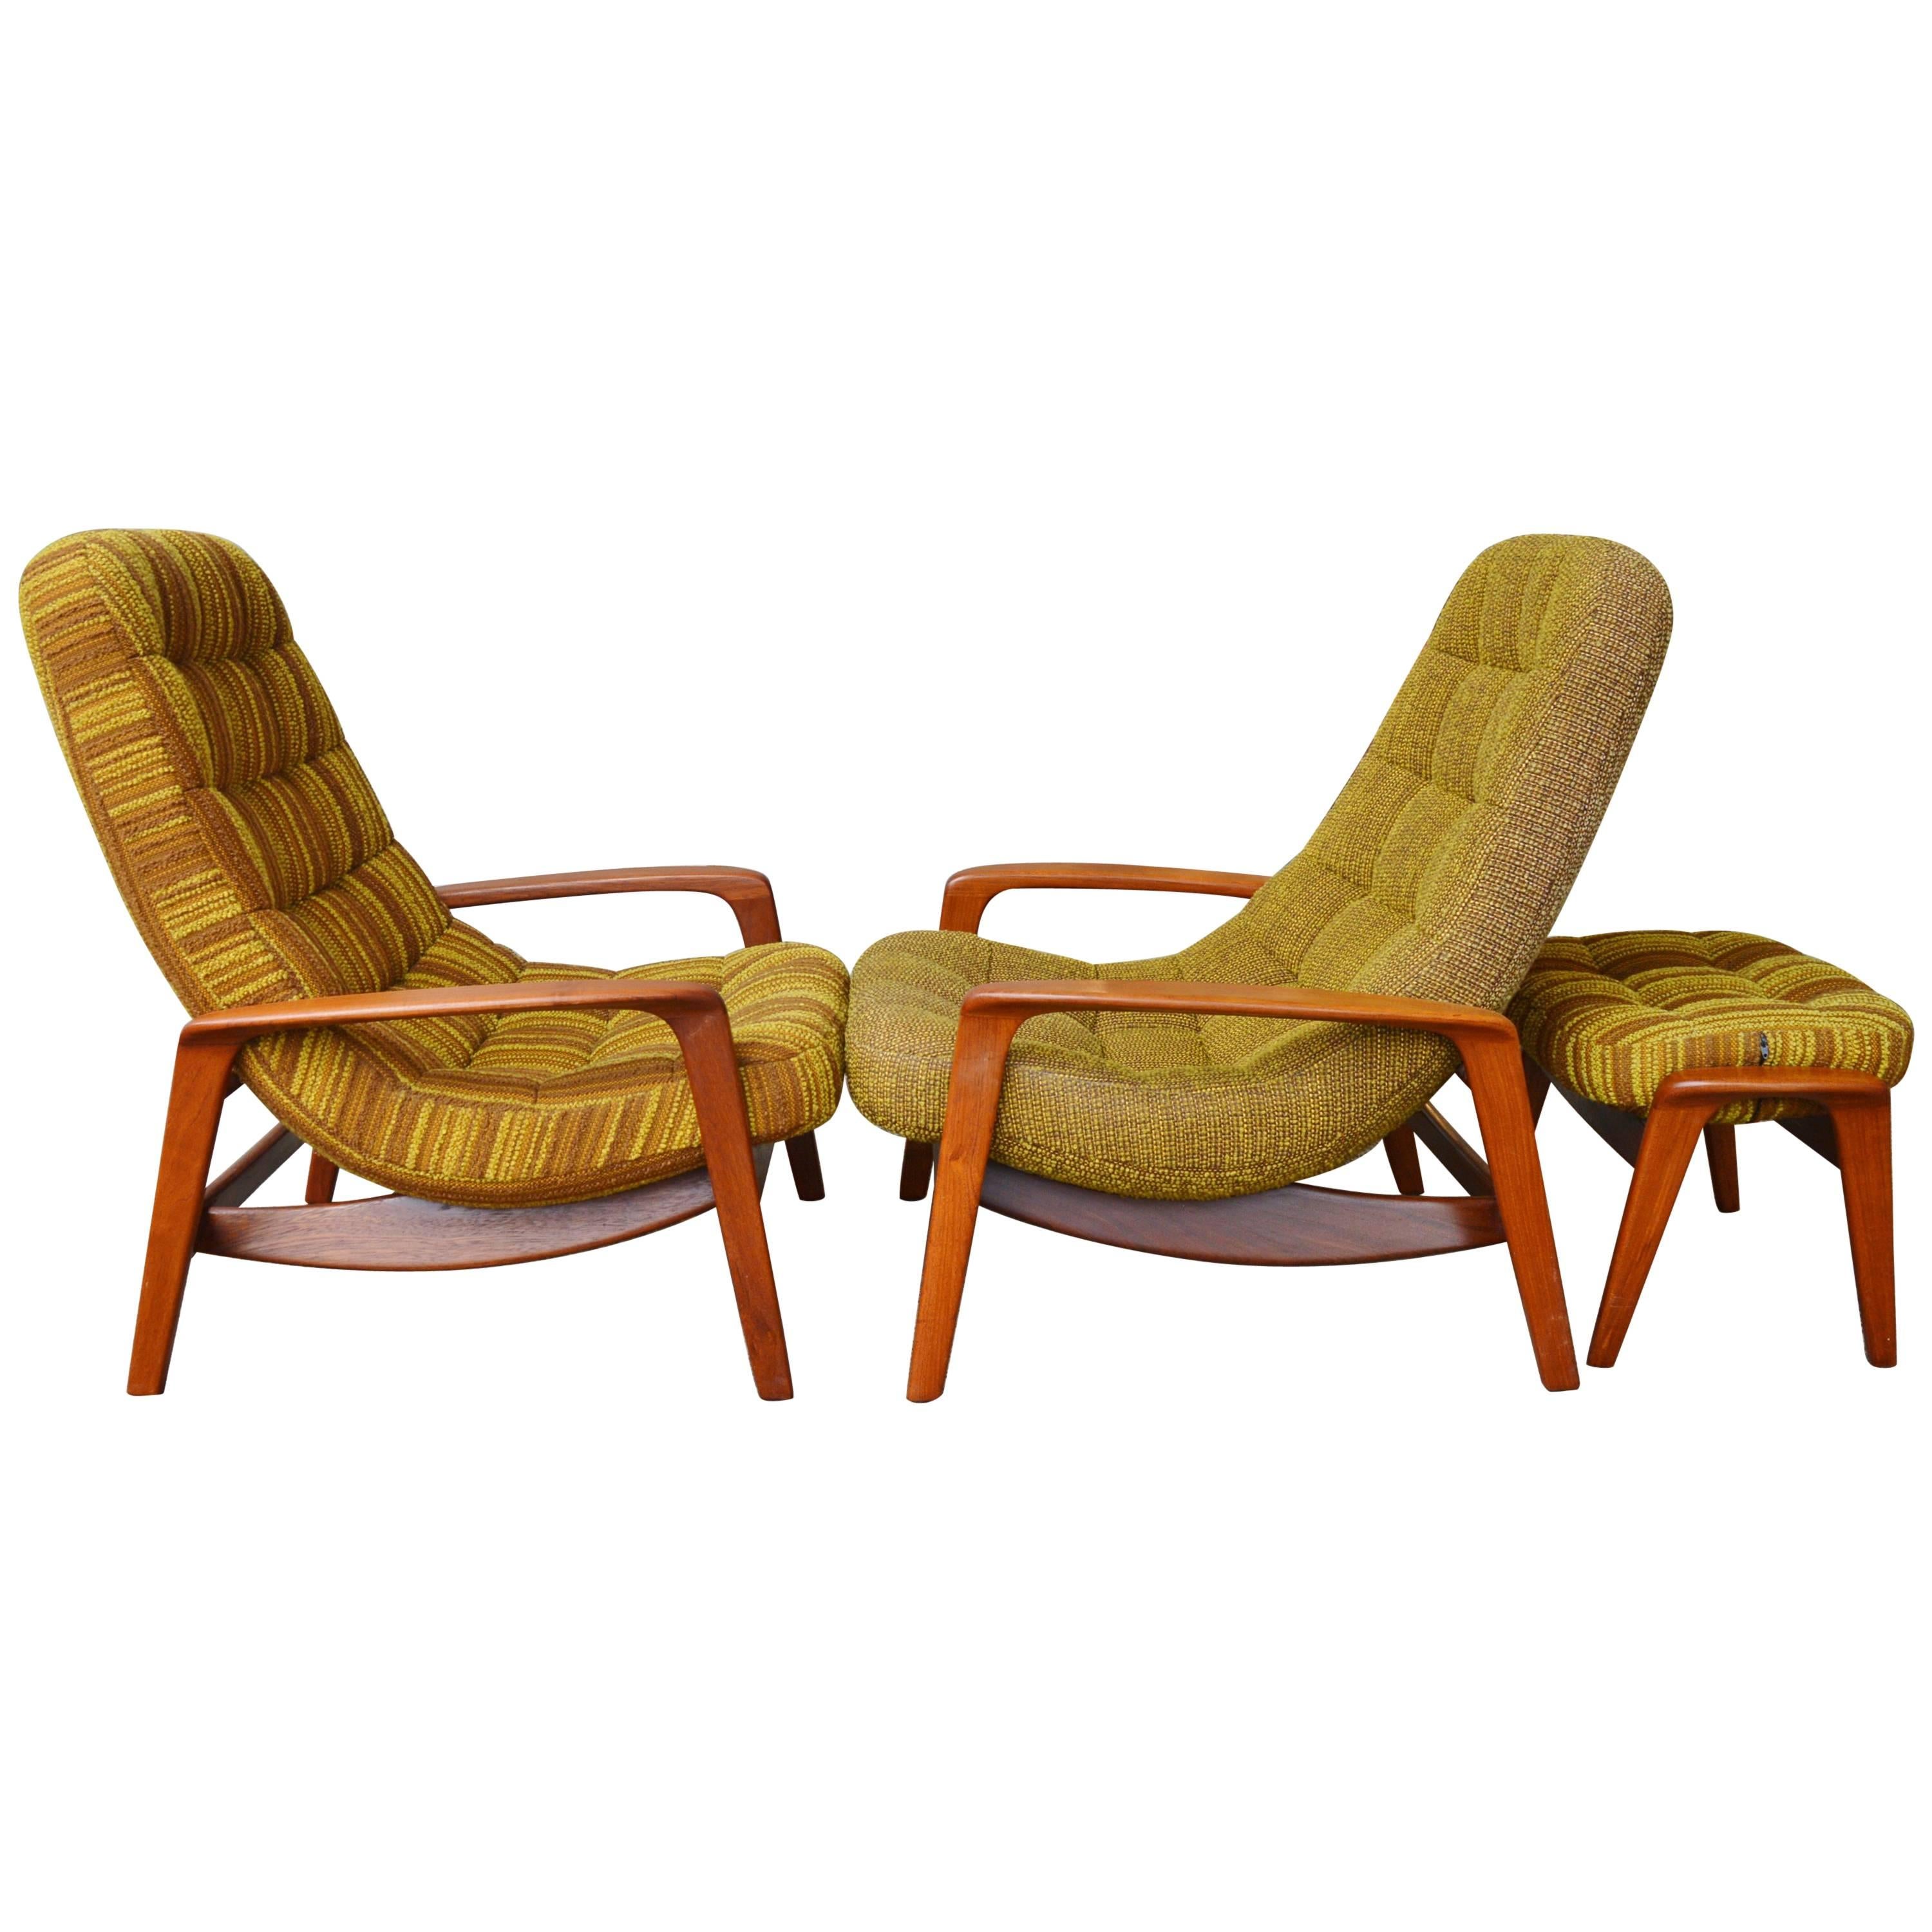 Two Teak Frame Button-Tufted "Palm" Lounge Chairs by R. Huber & Co. & Ottoman